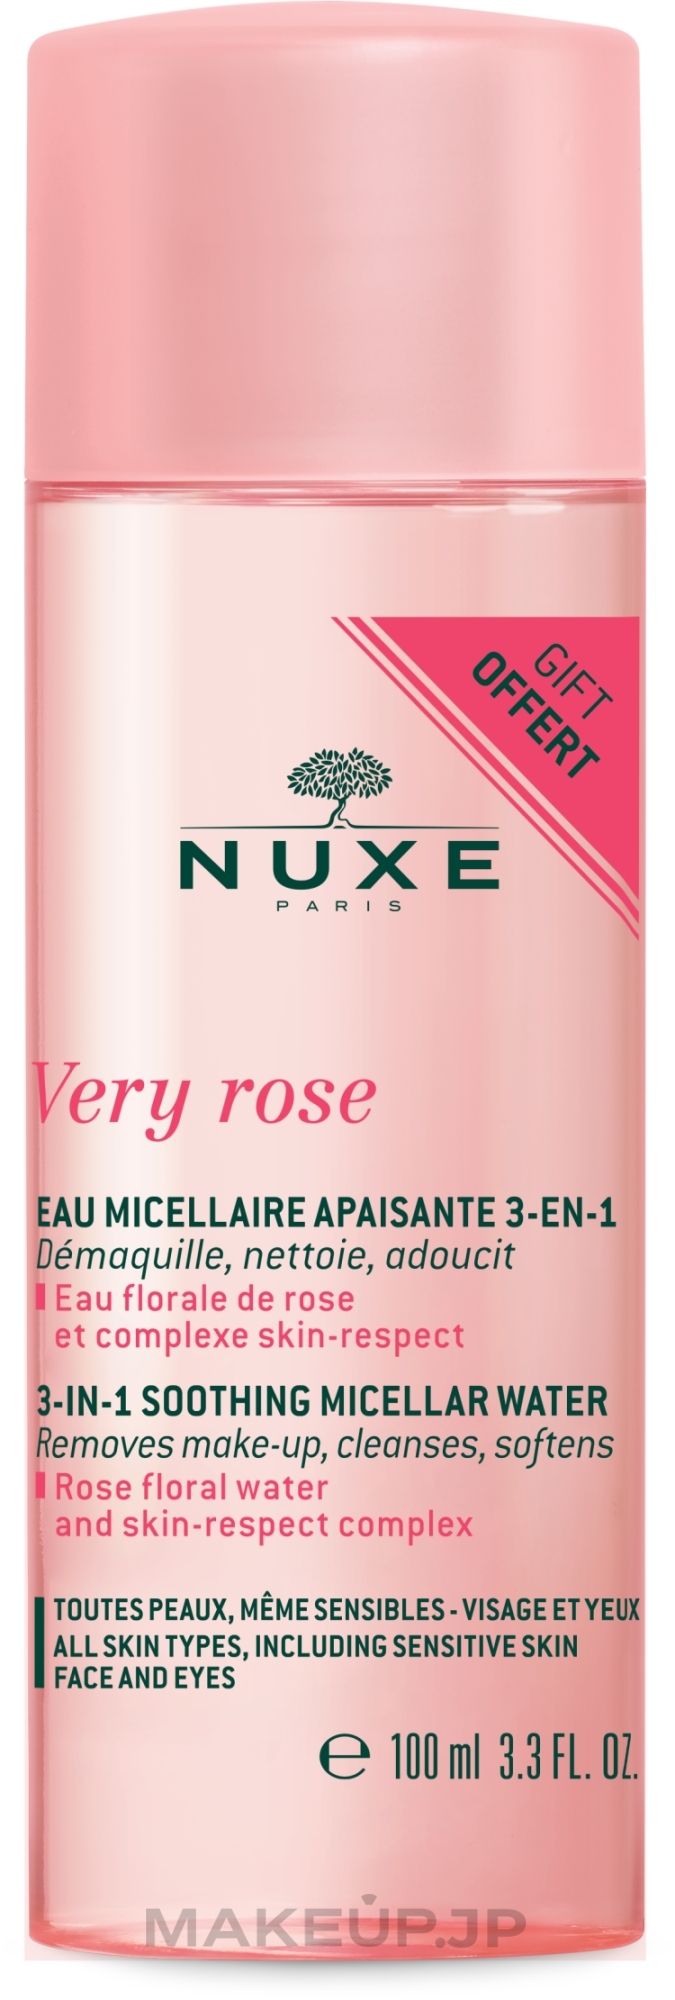 Soothing Micellar Face & Eye Water - Nuxe Very Rose 3 in 1 Soothing Micellar Water — photo 100 ml